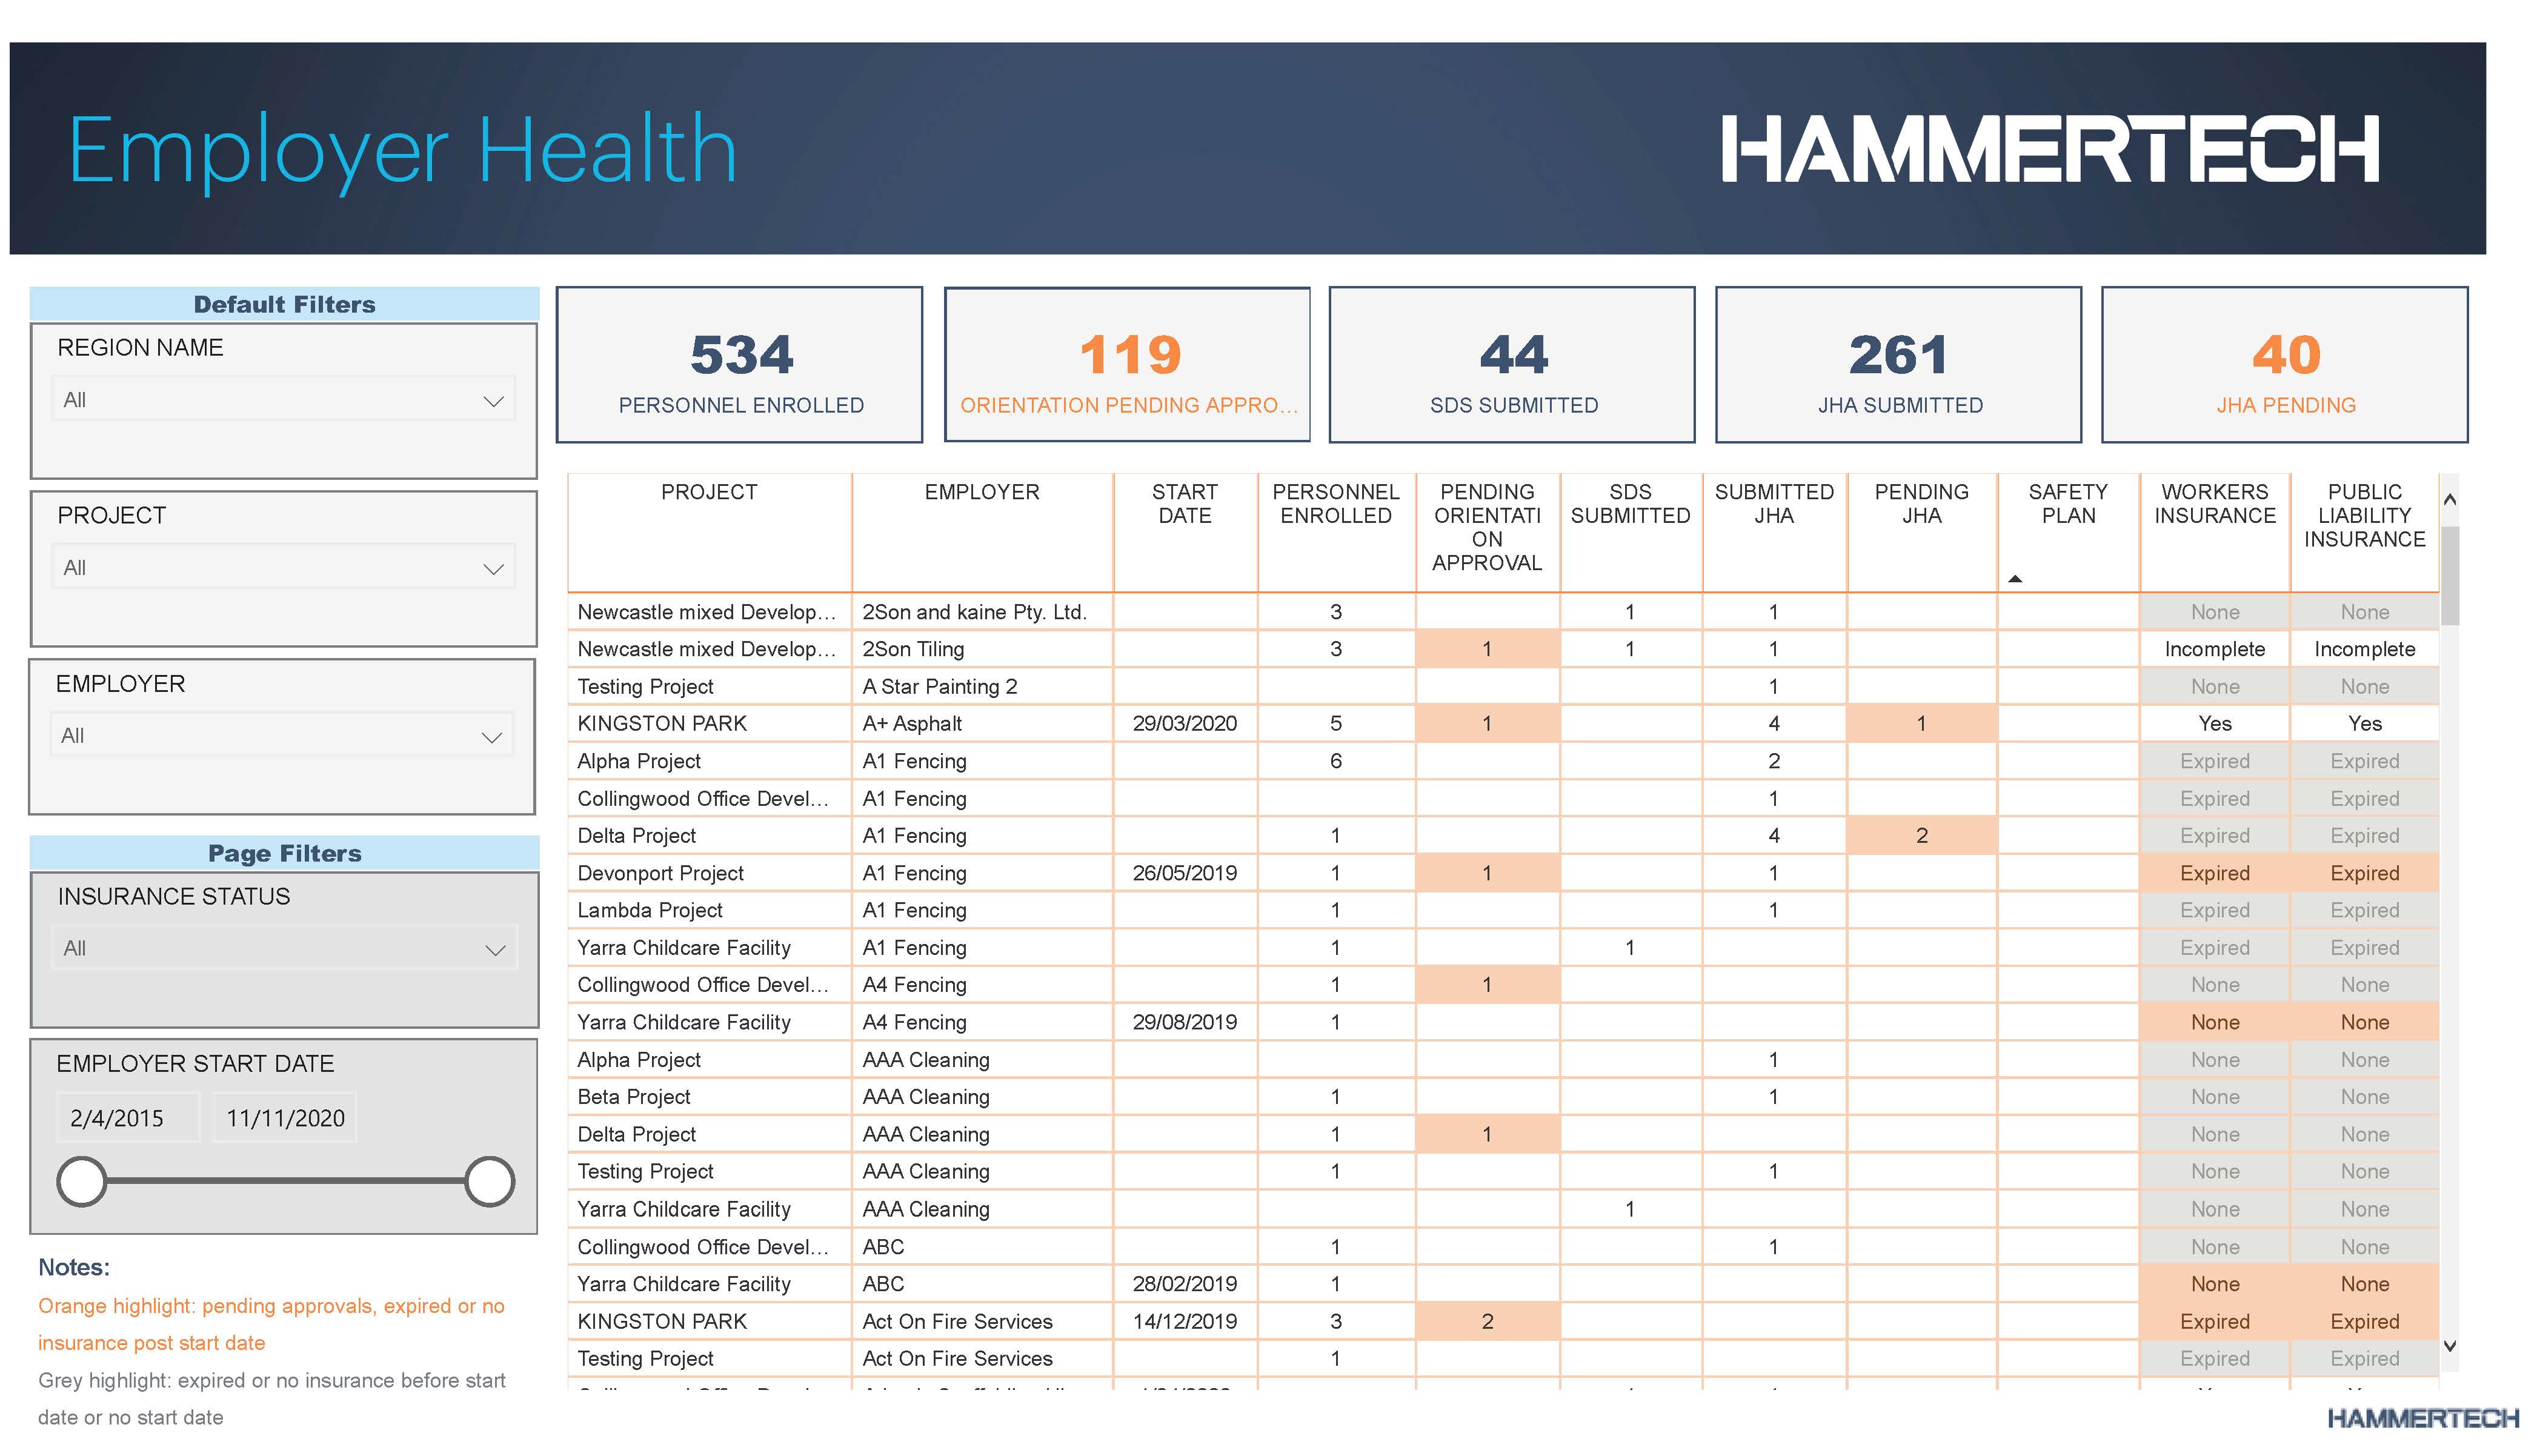 Screen grab of HammerTech's integration with Power BI, showing an 'Employer Health Overview' dashboard. The image represents the platform's powerful data analytics capabilities, offering actionable insights for effective risk management and improved operational health in construction projects.